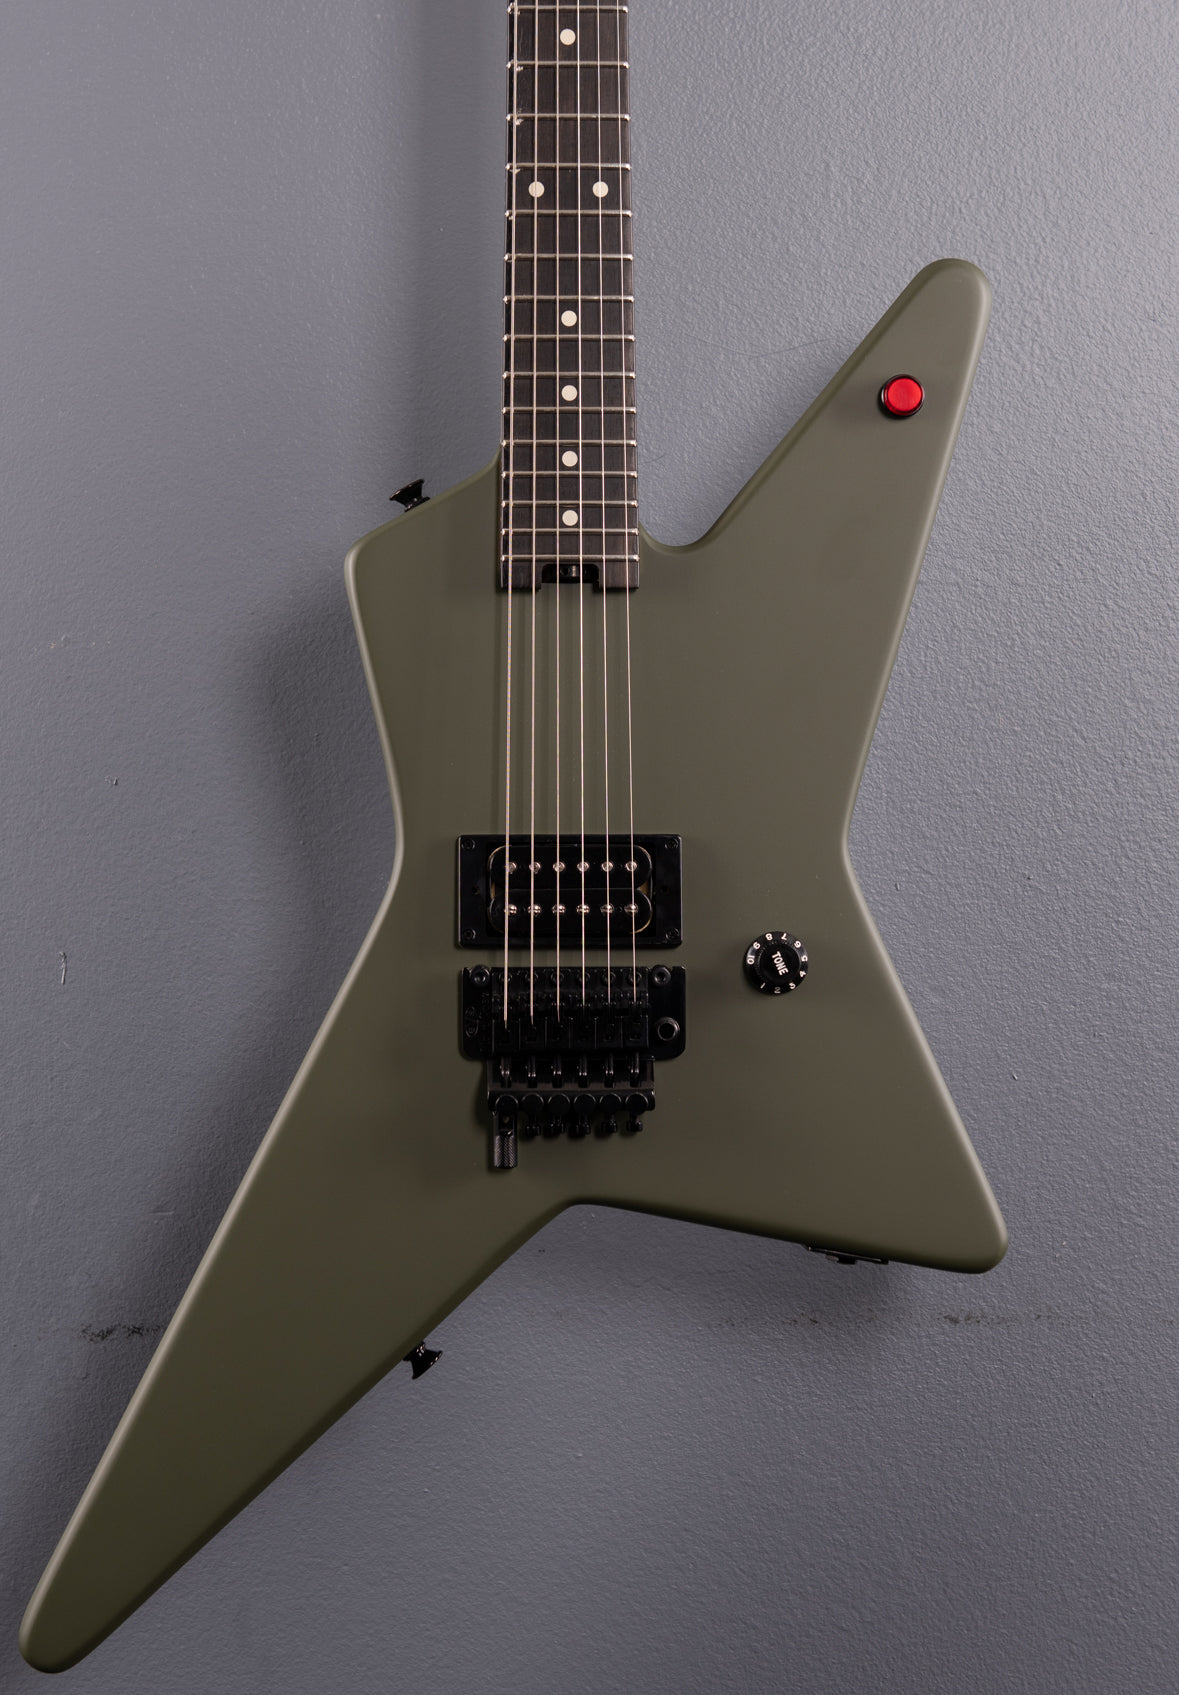 Limited Edition Star - Matte Army Drab